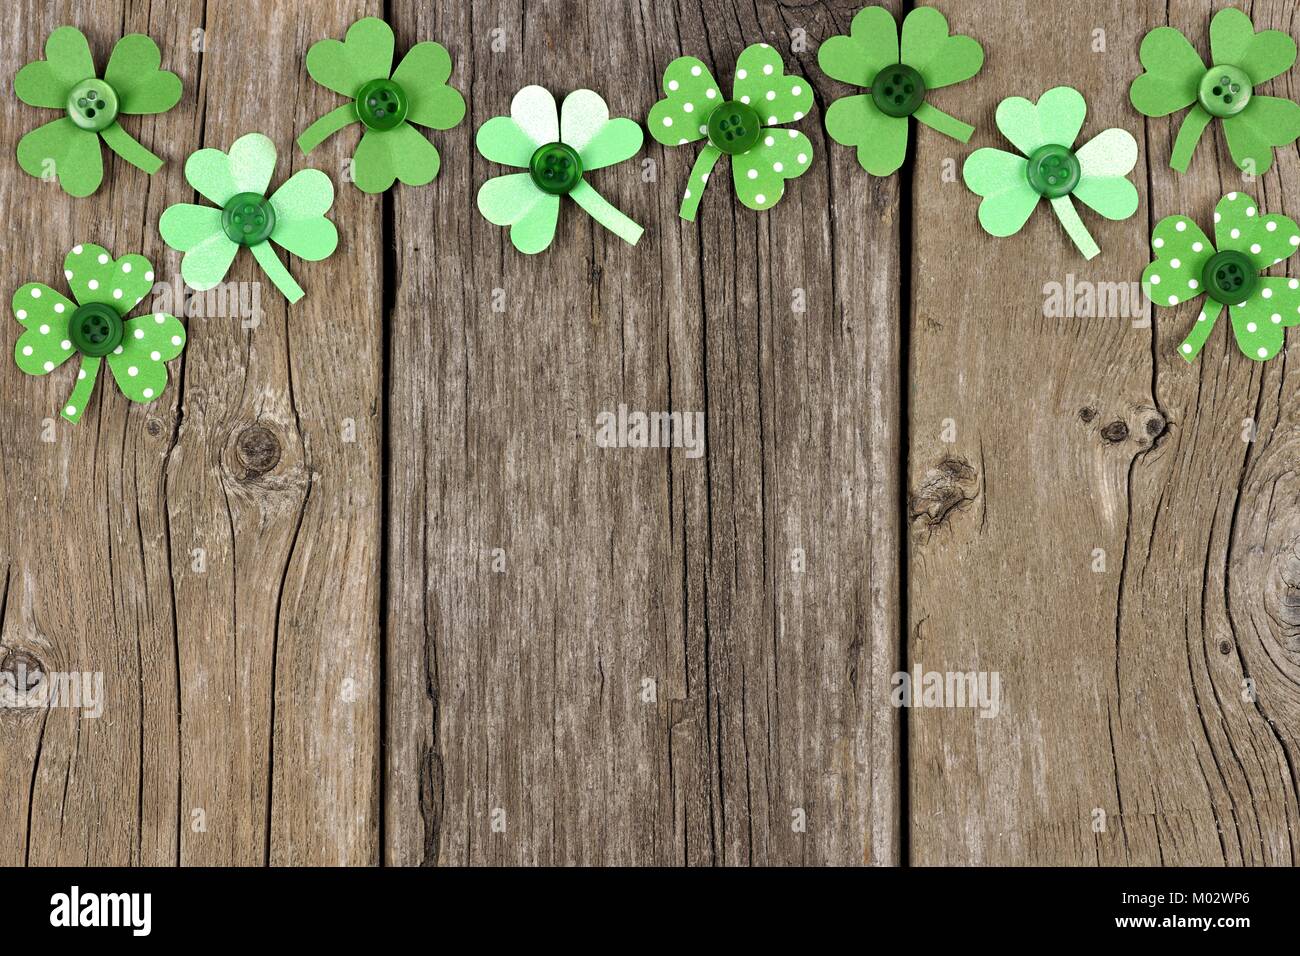 St Patricks Day top border of handmade paper shamrocks over a rustic wood background Stock Photo